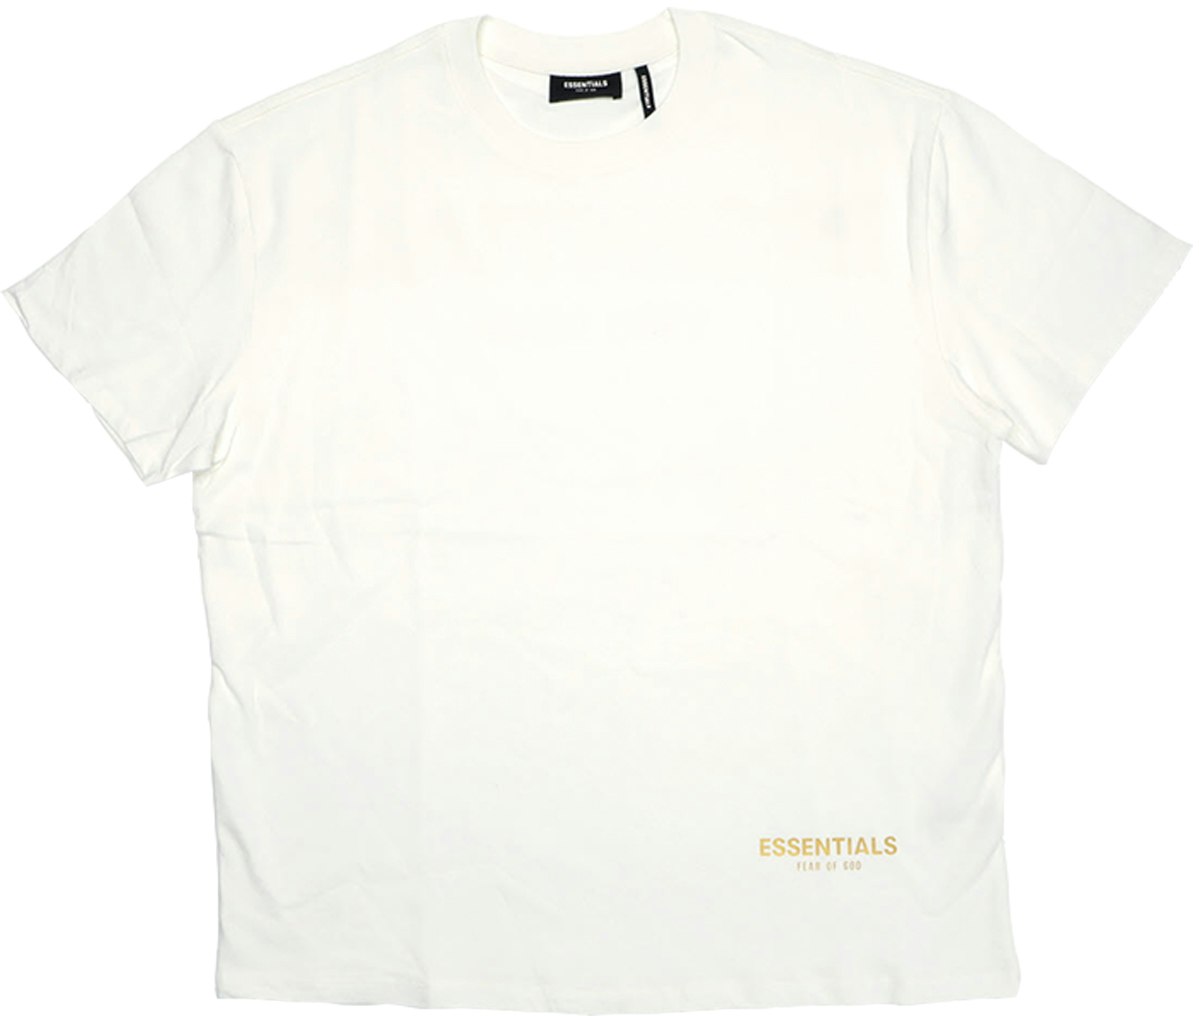 NEW WE THE ESSENTIALS, WHITE